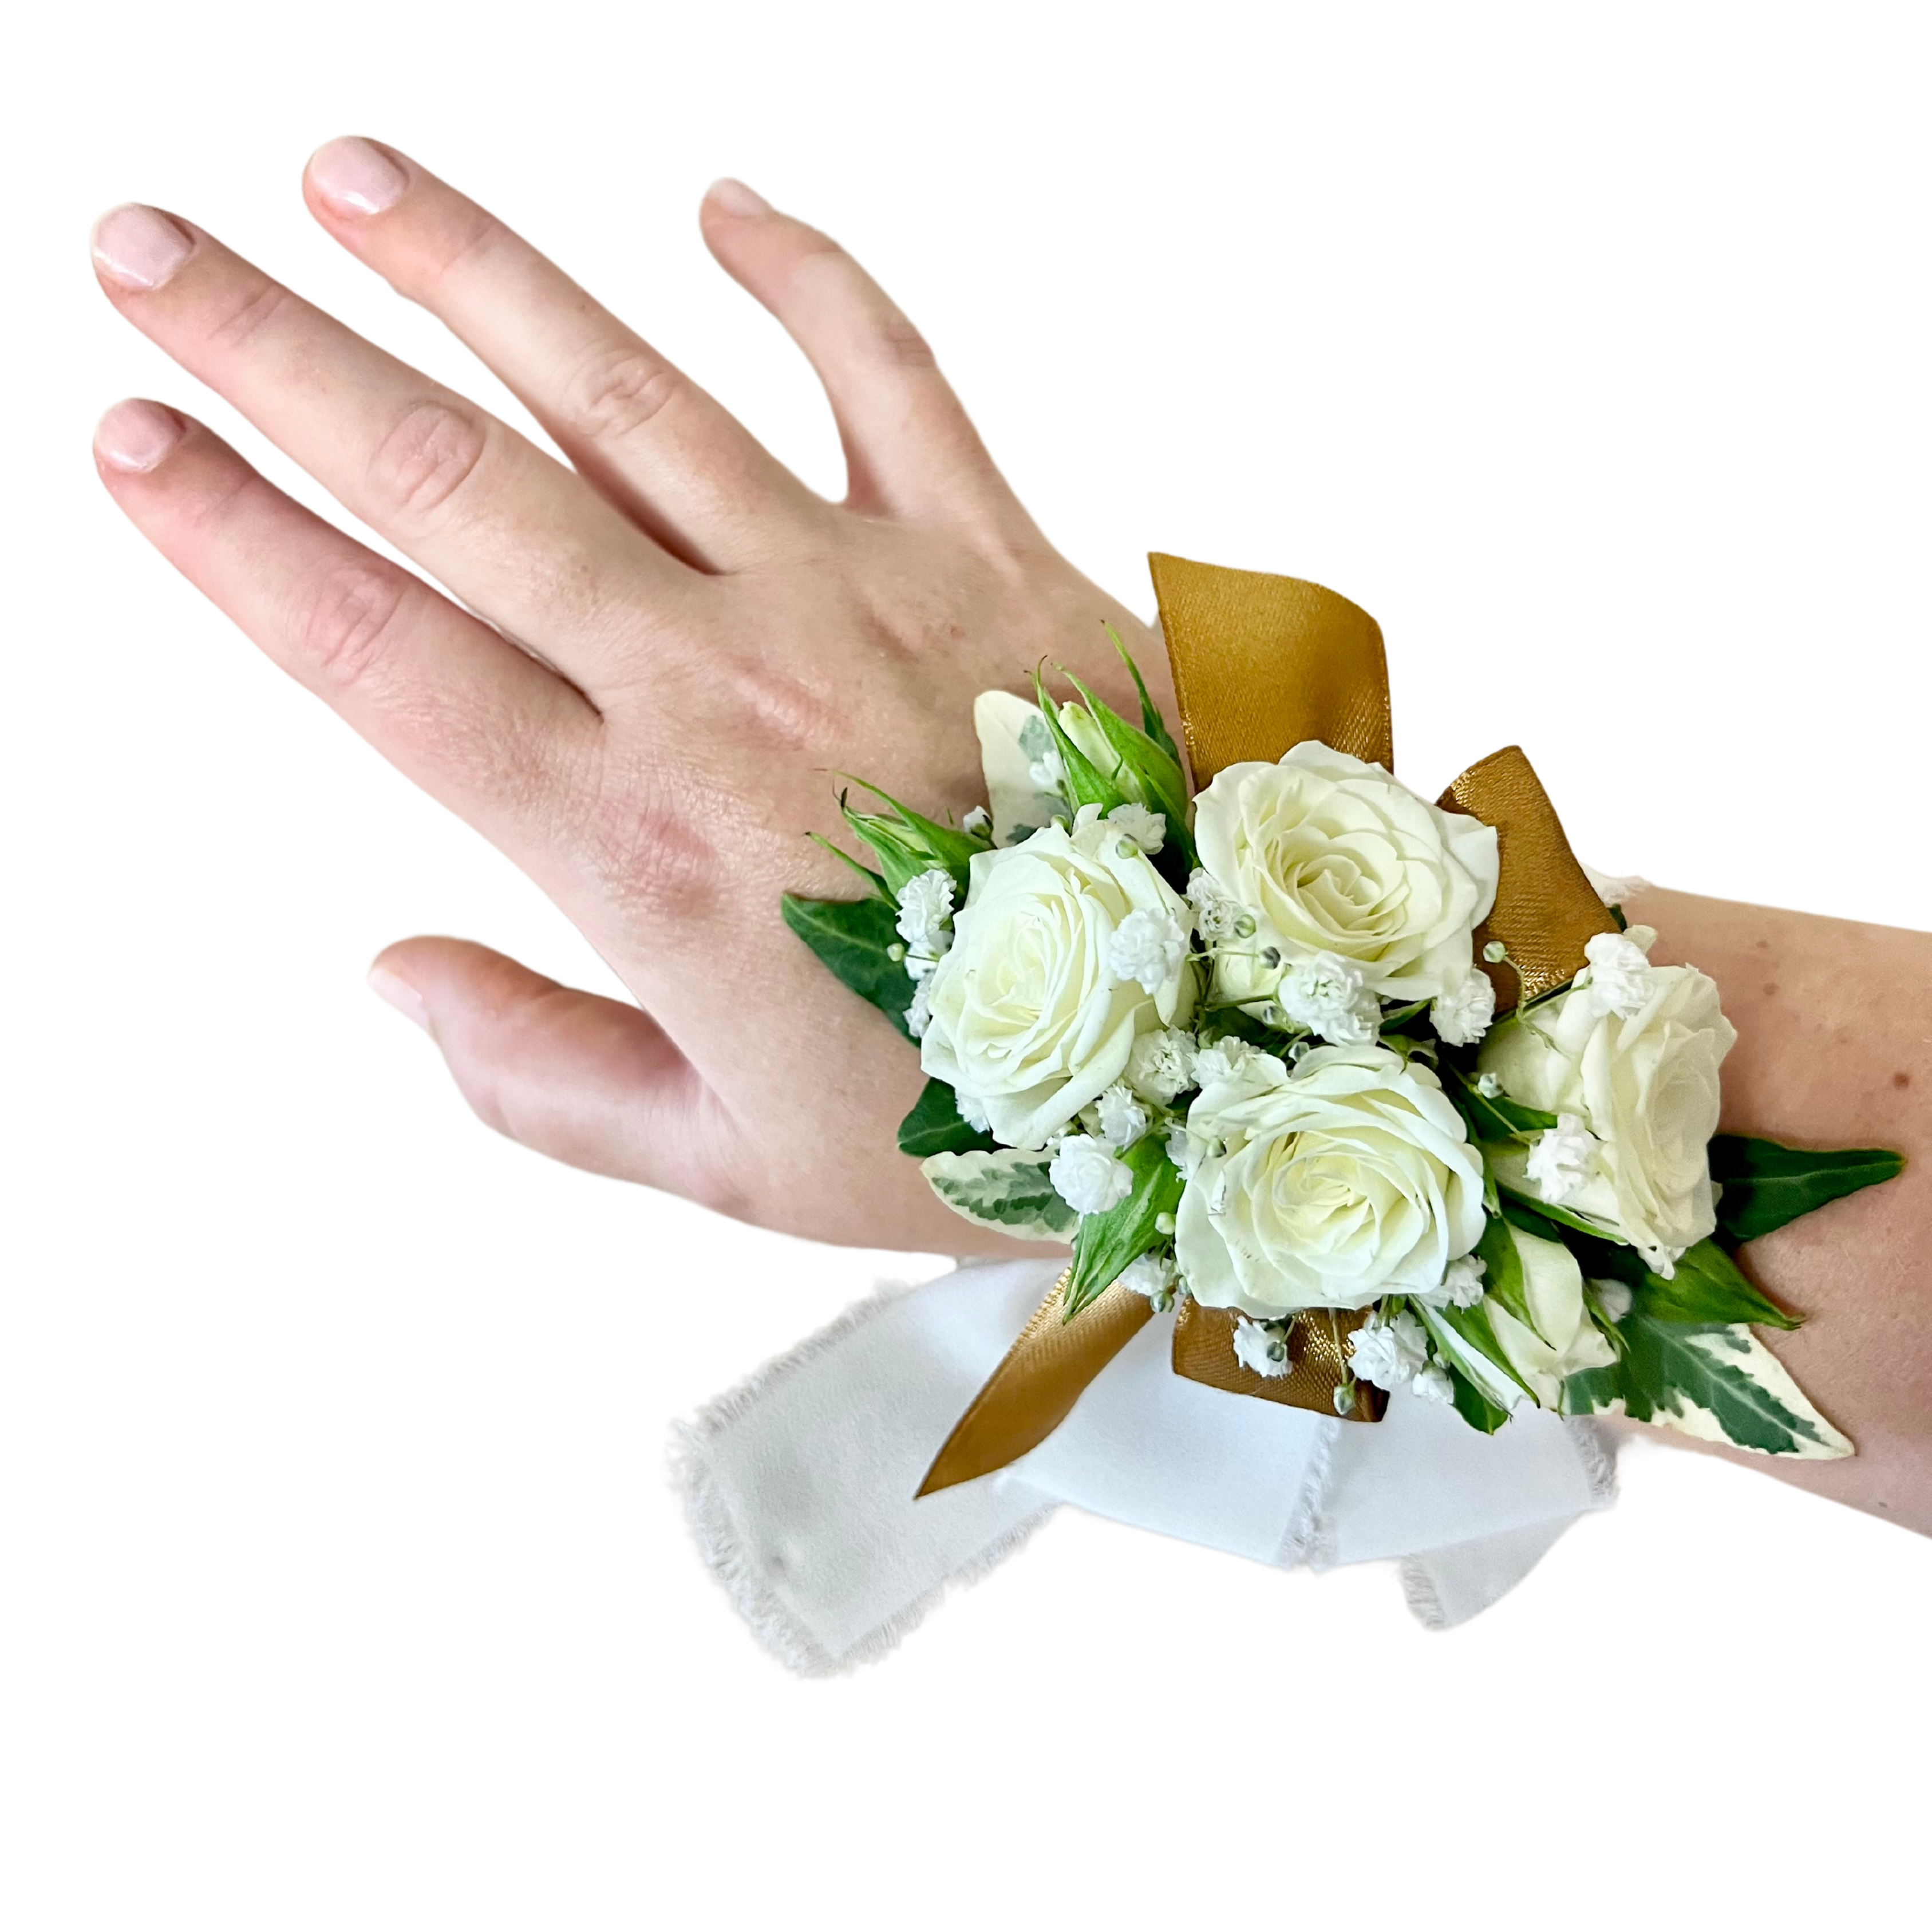 Formal Wrist Corsage of Roses - Ribbon